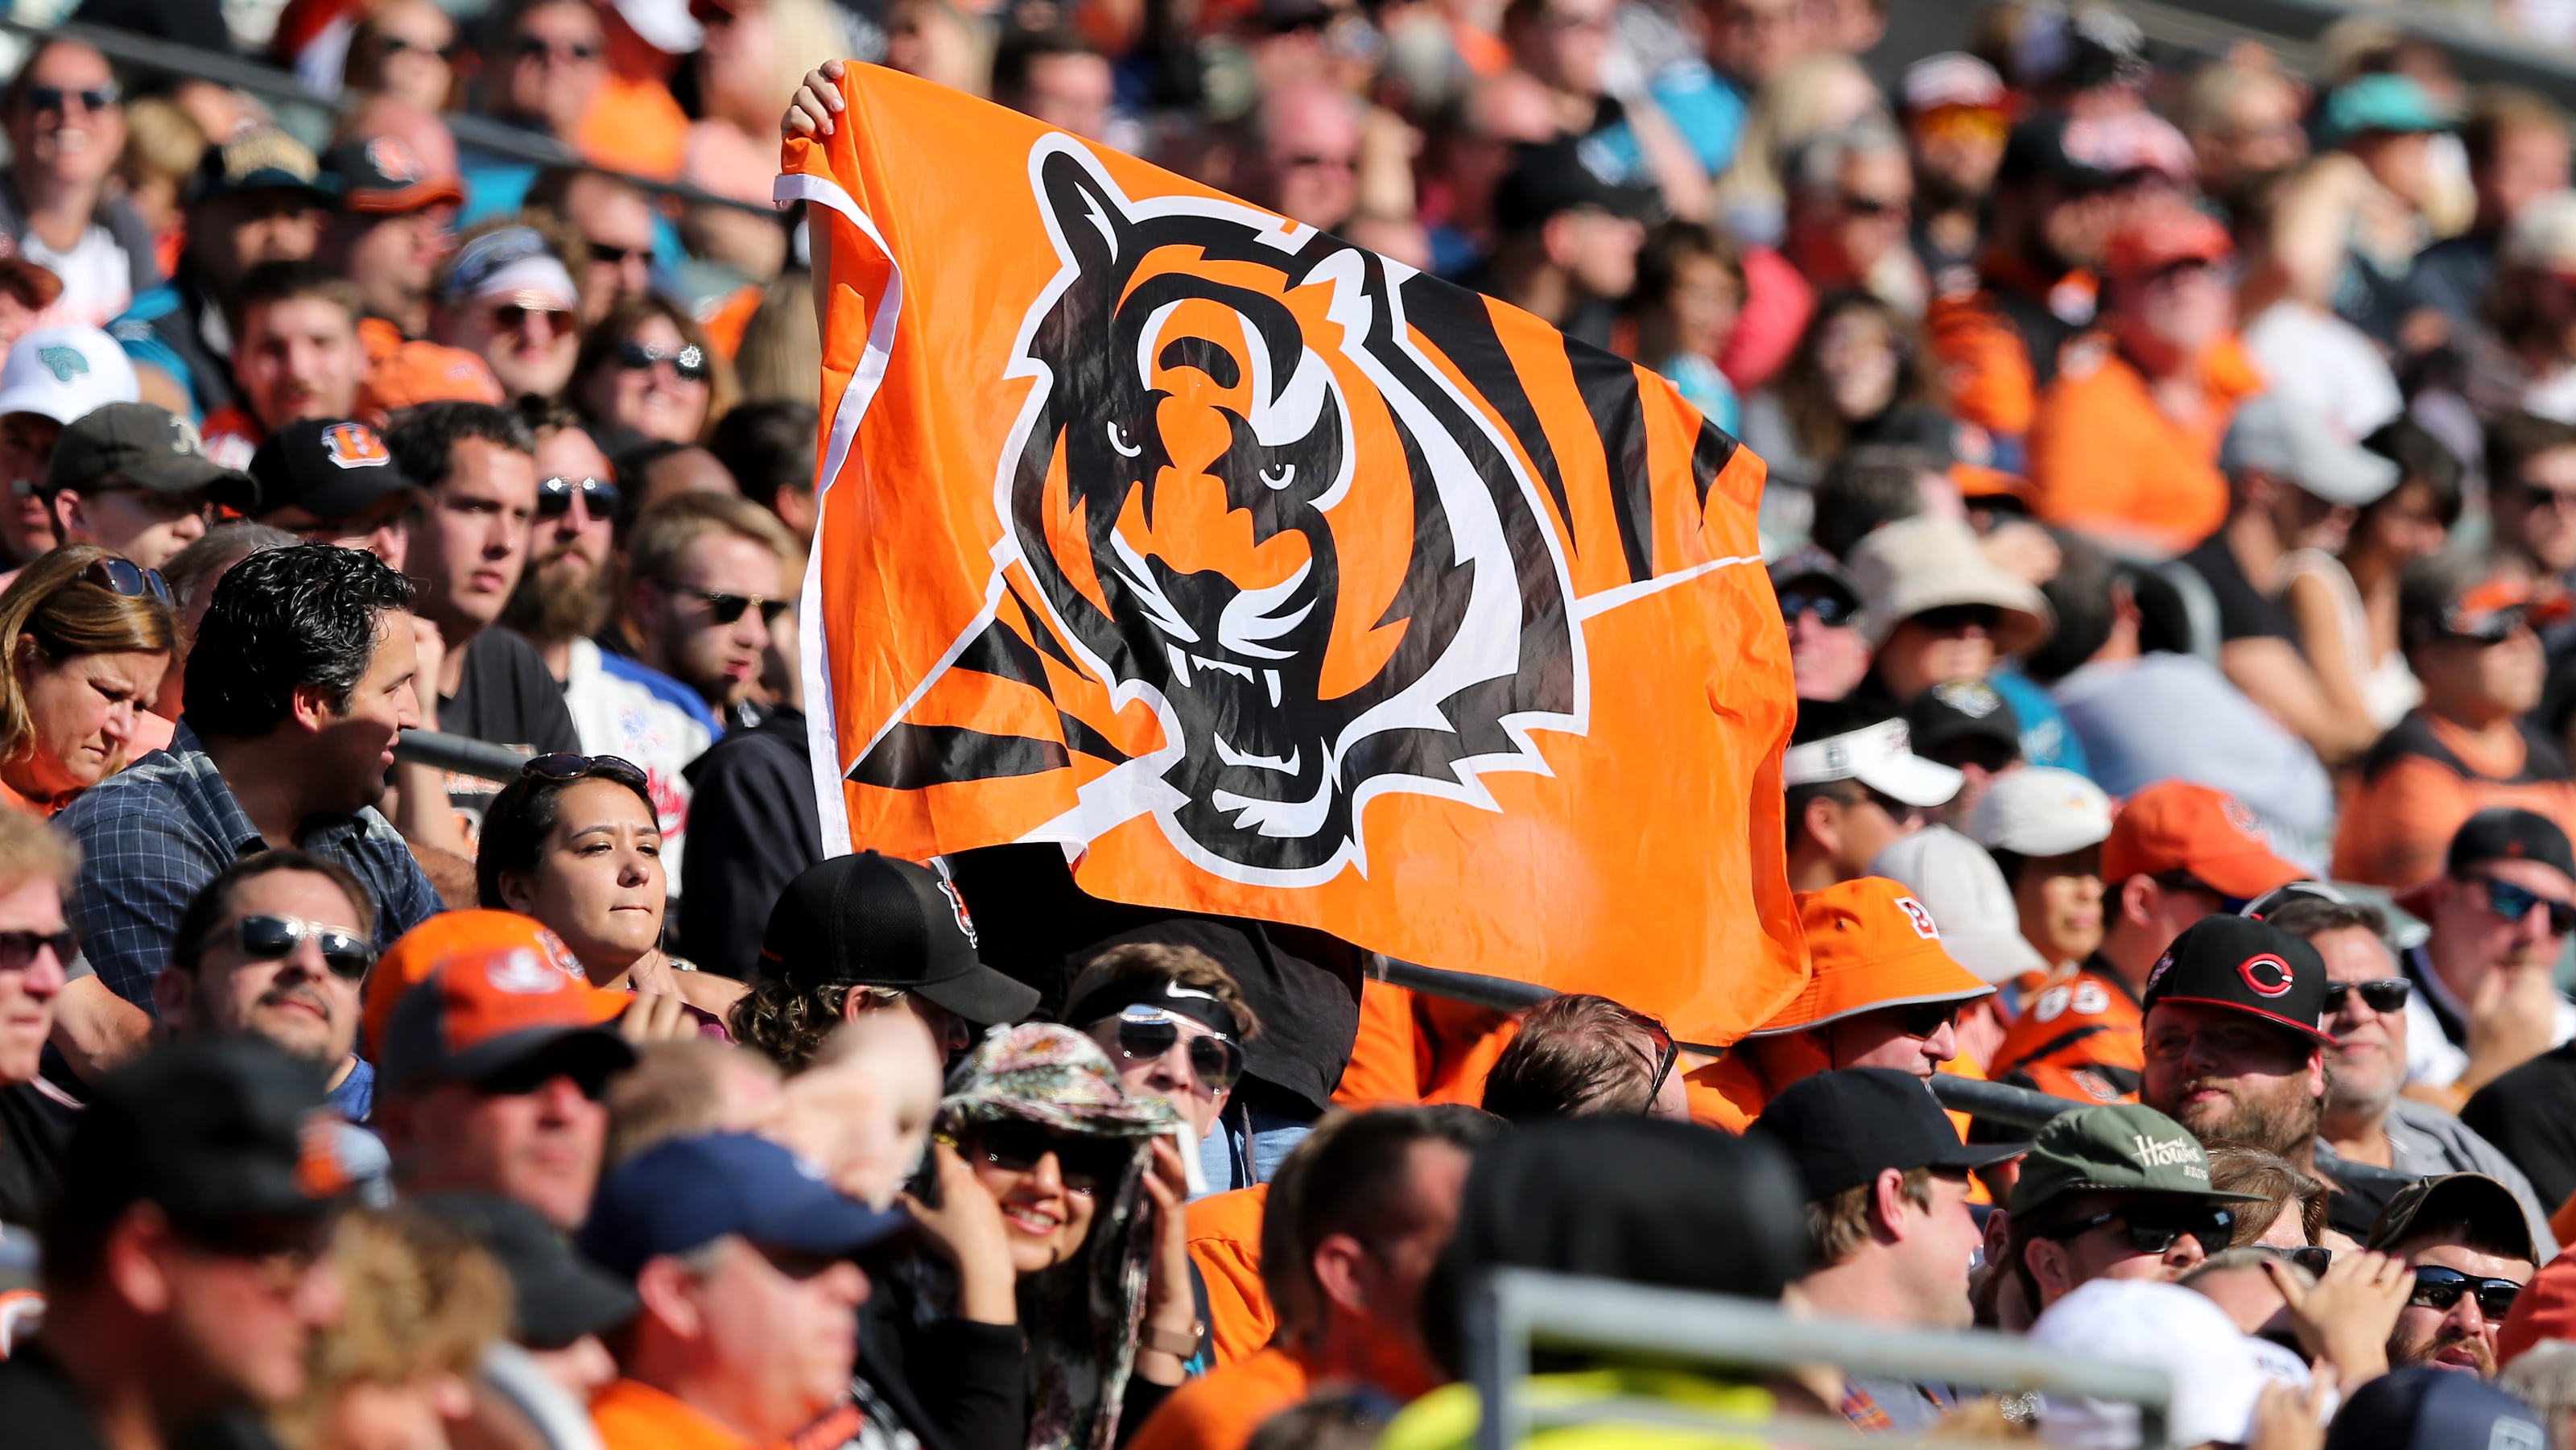 Cincinnati Bengals What to know before you go to a game in 2021